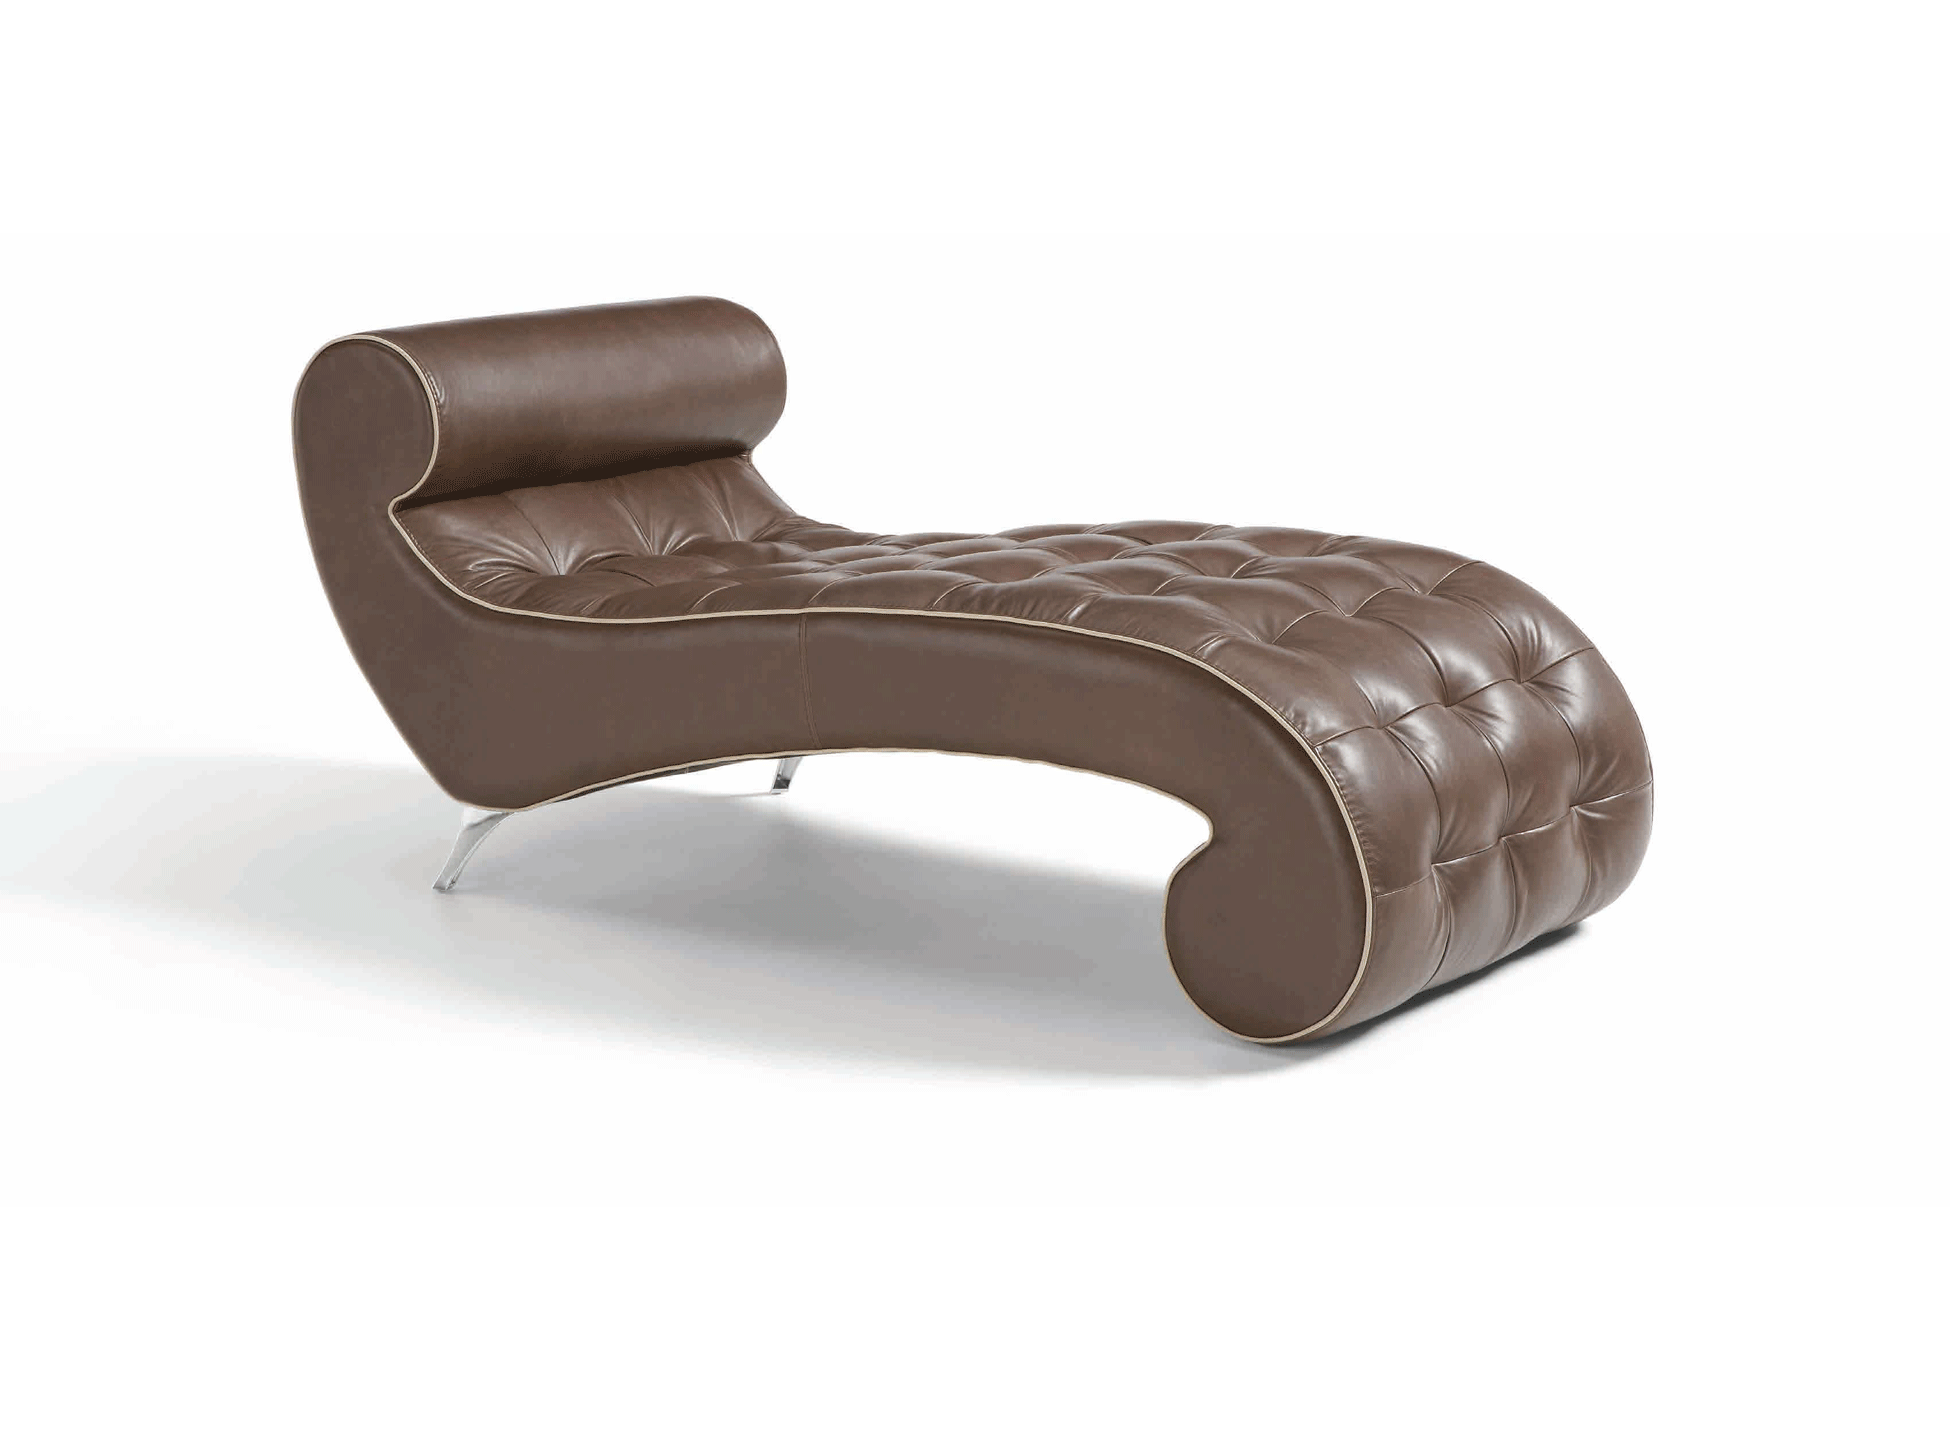 Living Room Furniture Sectionals Barcellona lounging Chair